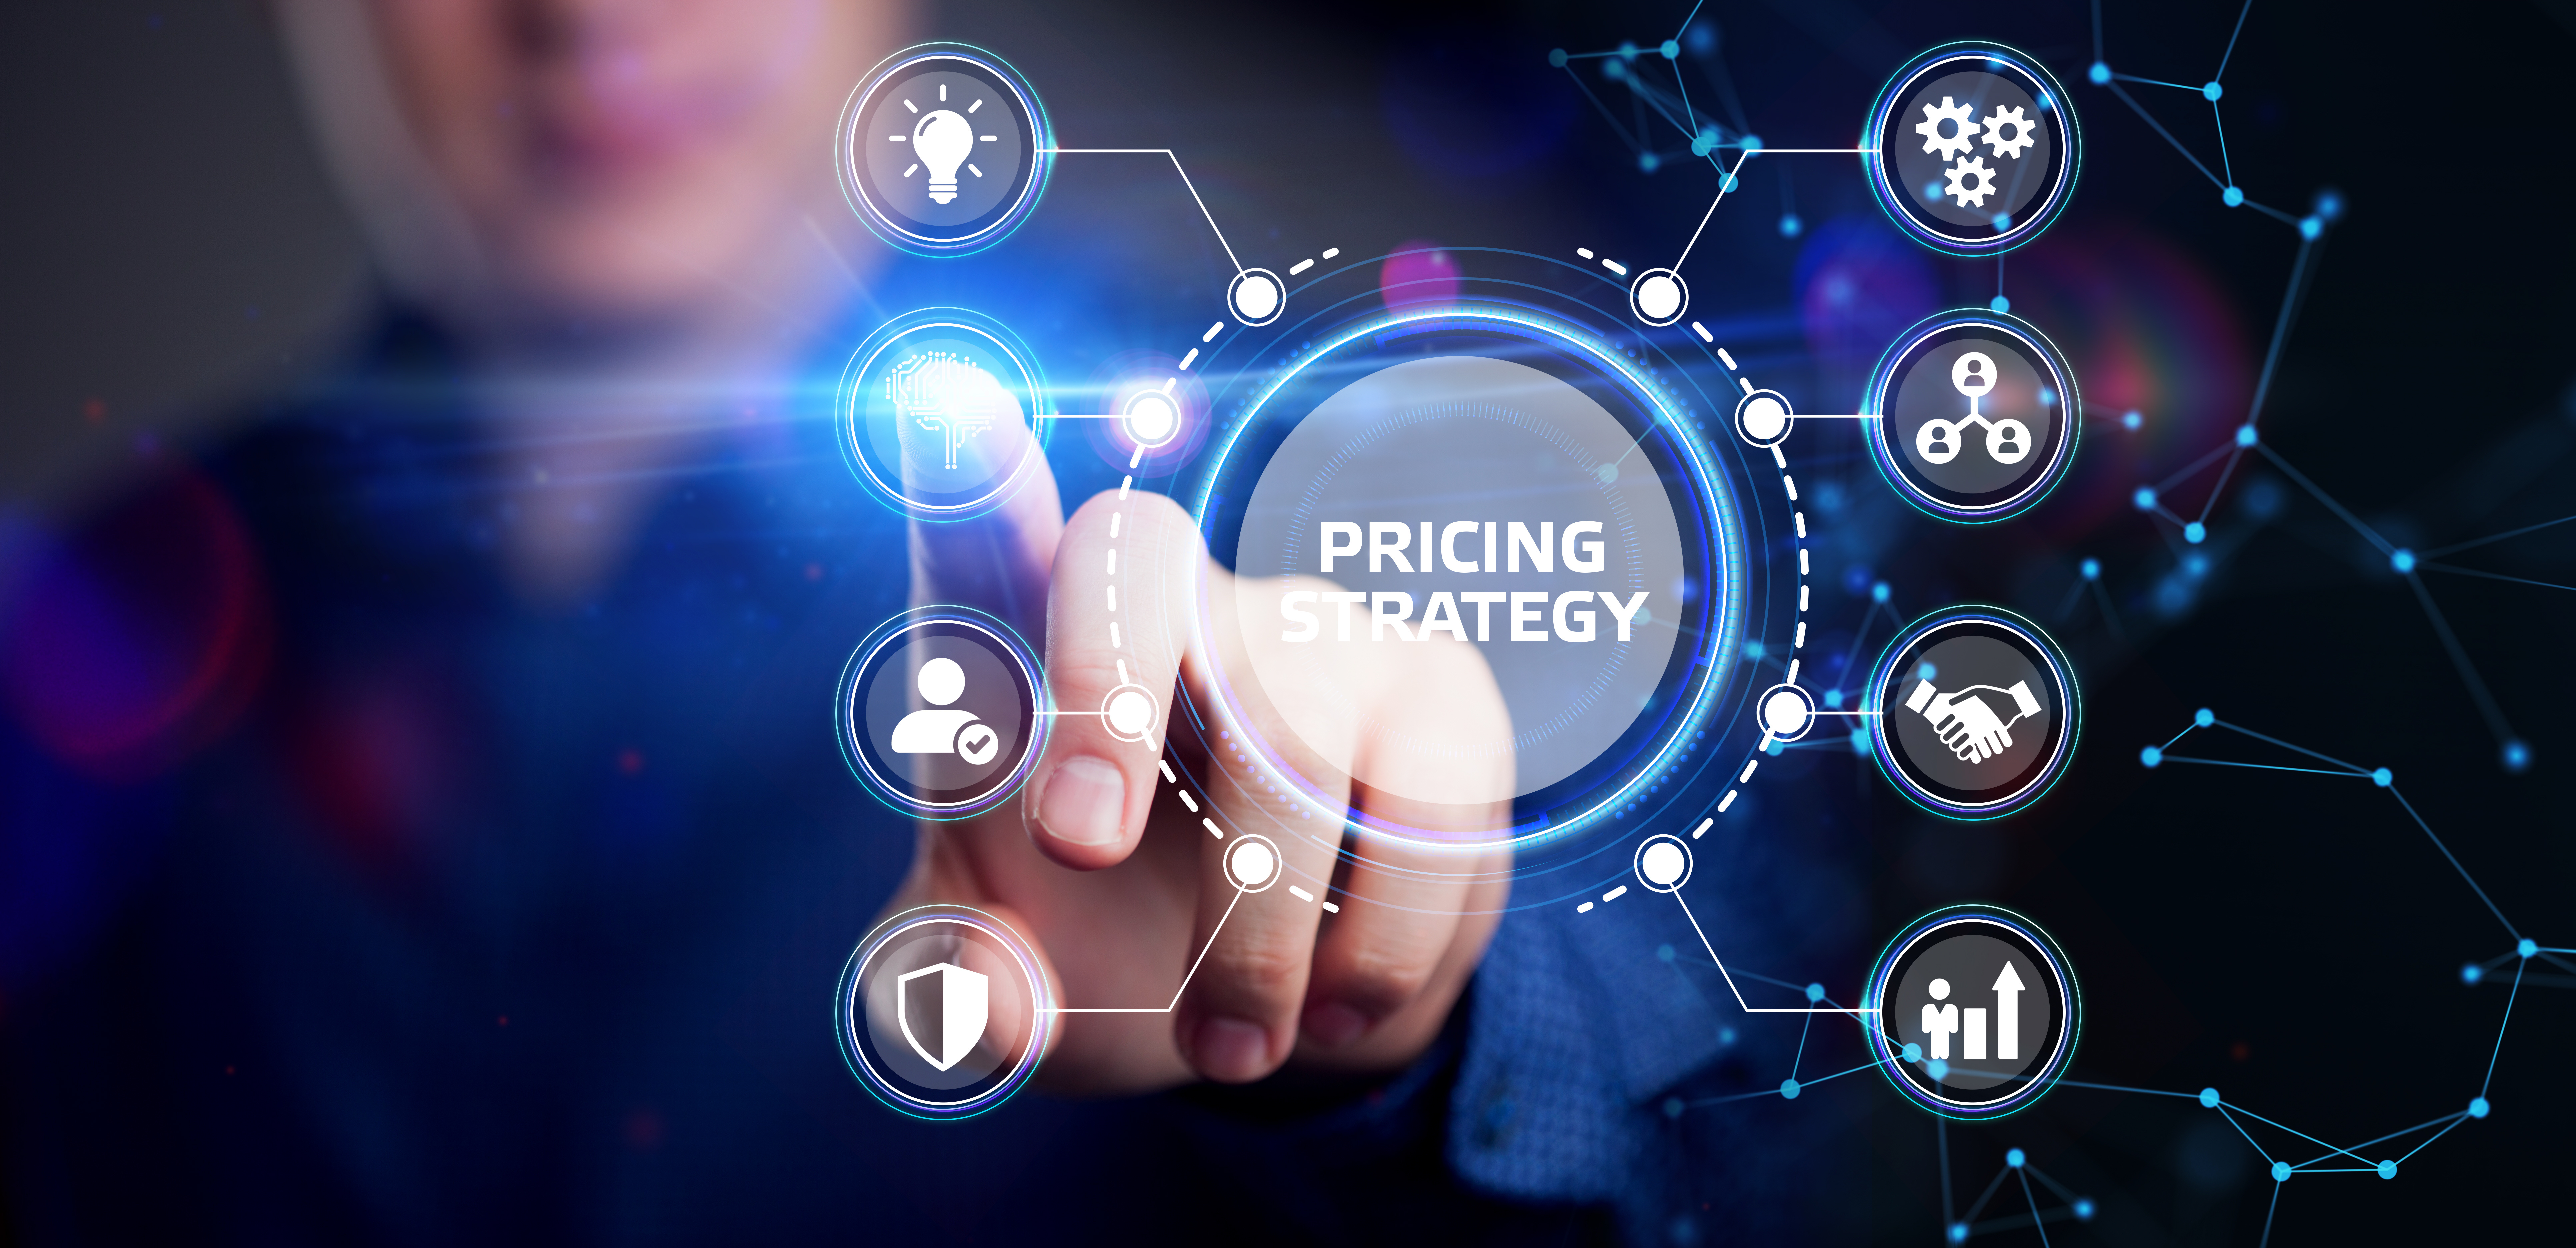 How To Raise Prices Strategically with Sales Team Buy-In